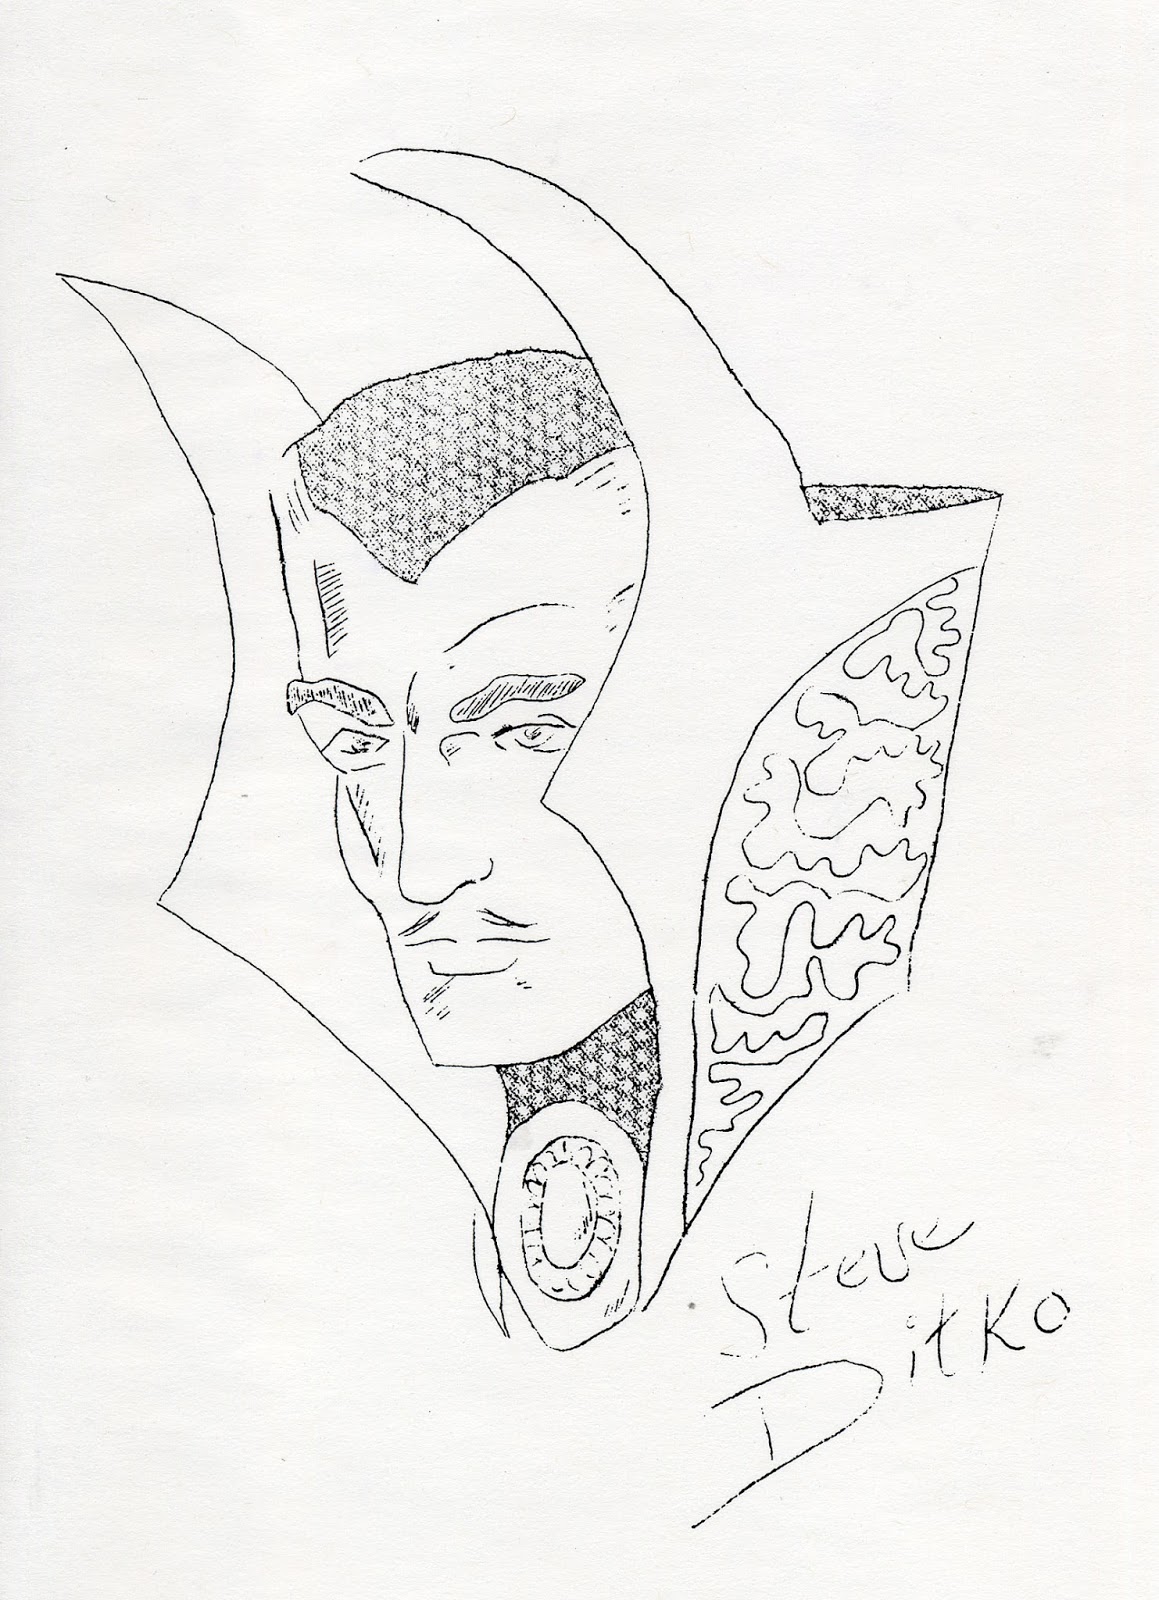 Tracer in the Art Style of Steve Ditko